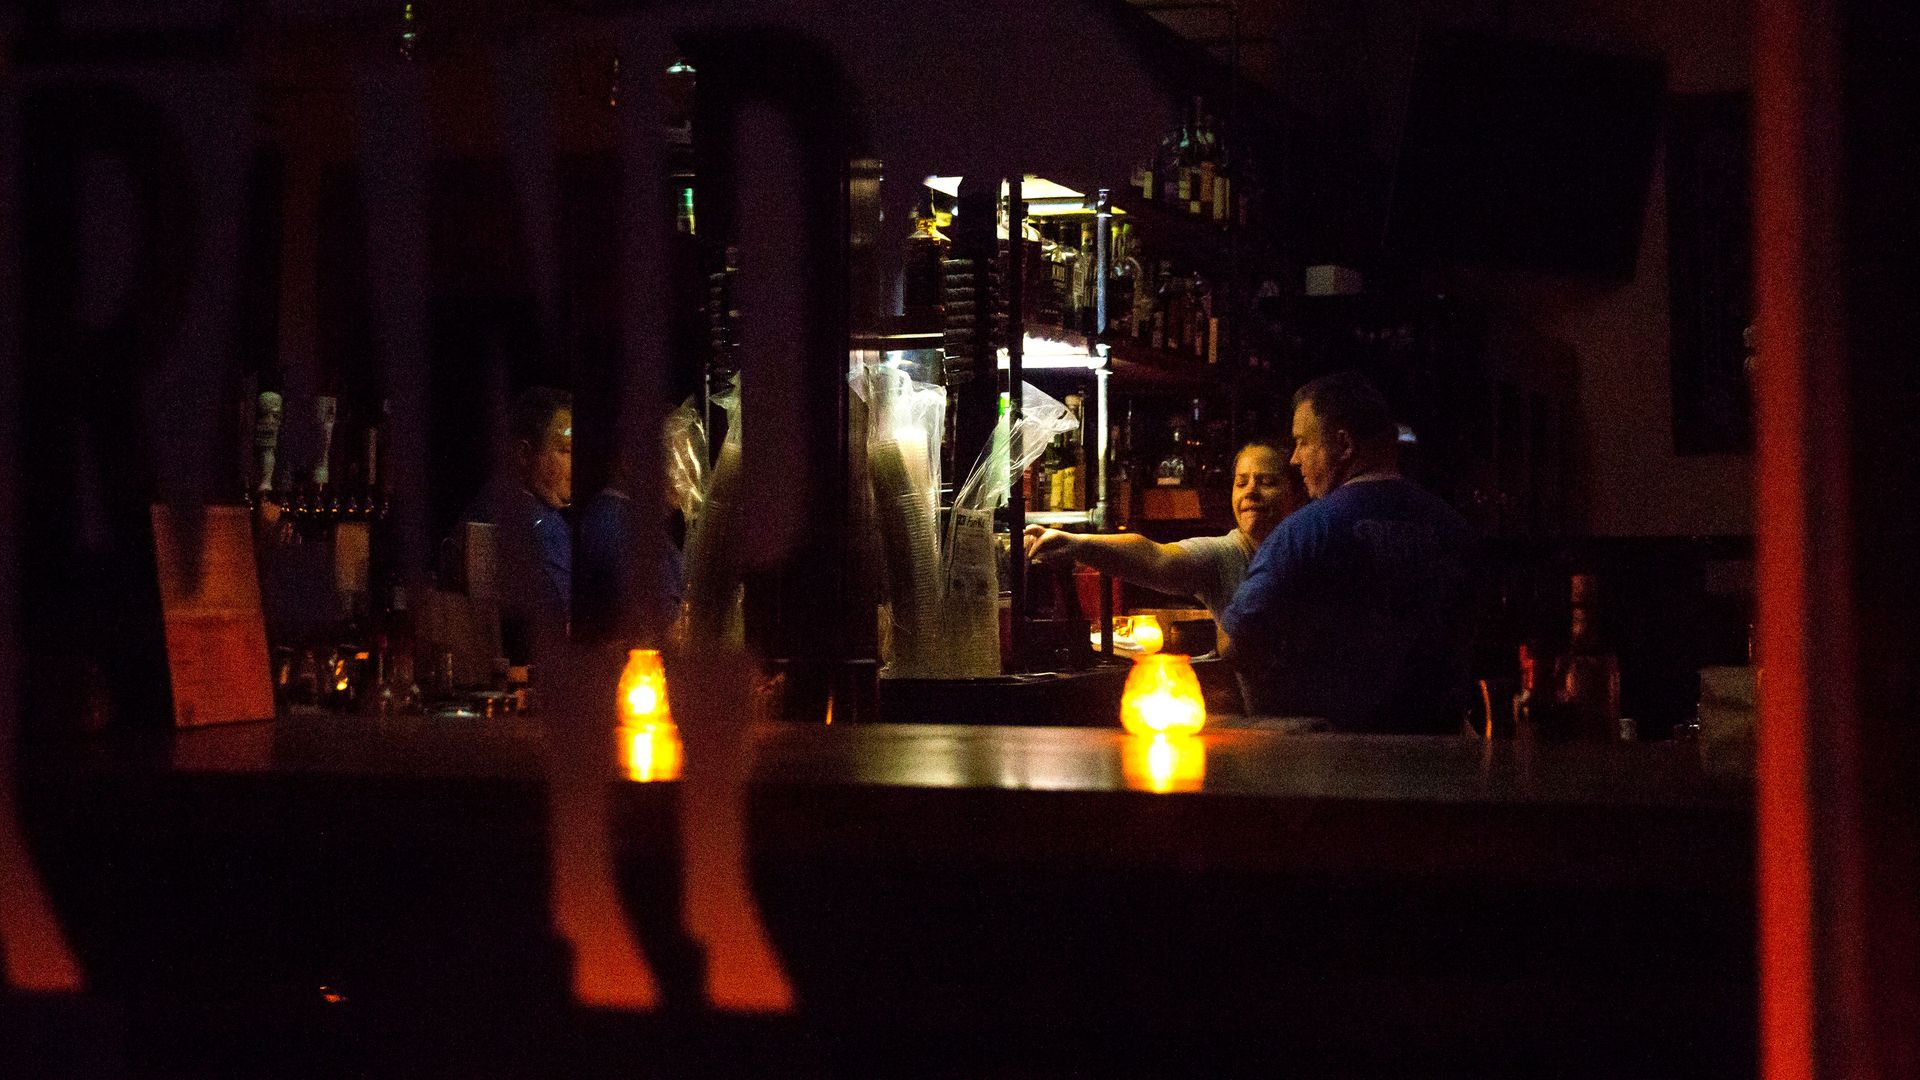 In this image, a bartender serves a customer at a darkened bar. 